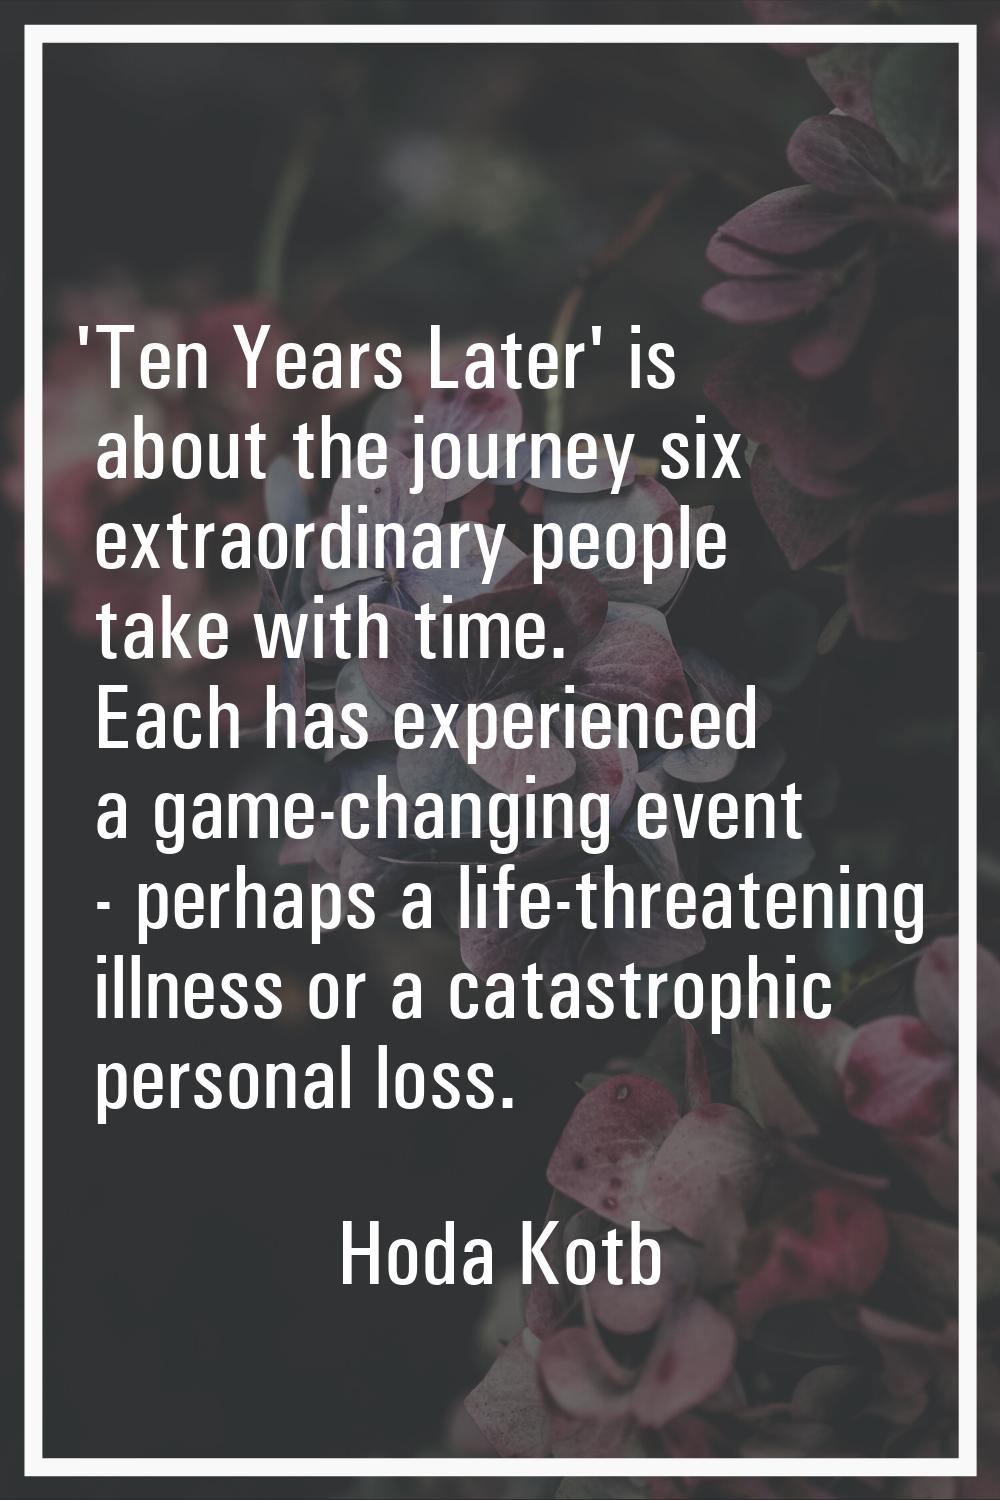 'Ten Years Later' is about the journey six extraordinary people take with time. Each has experience